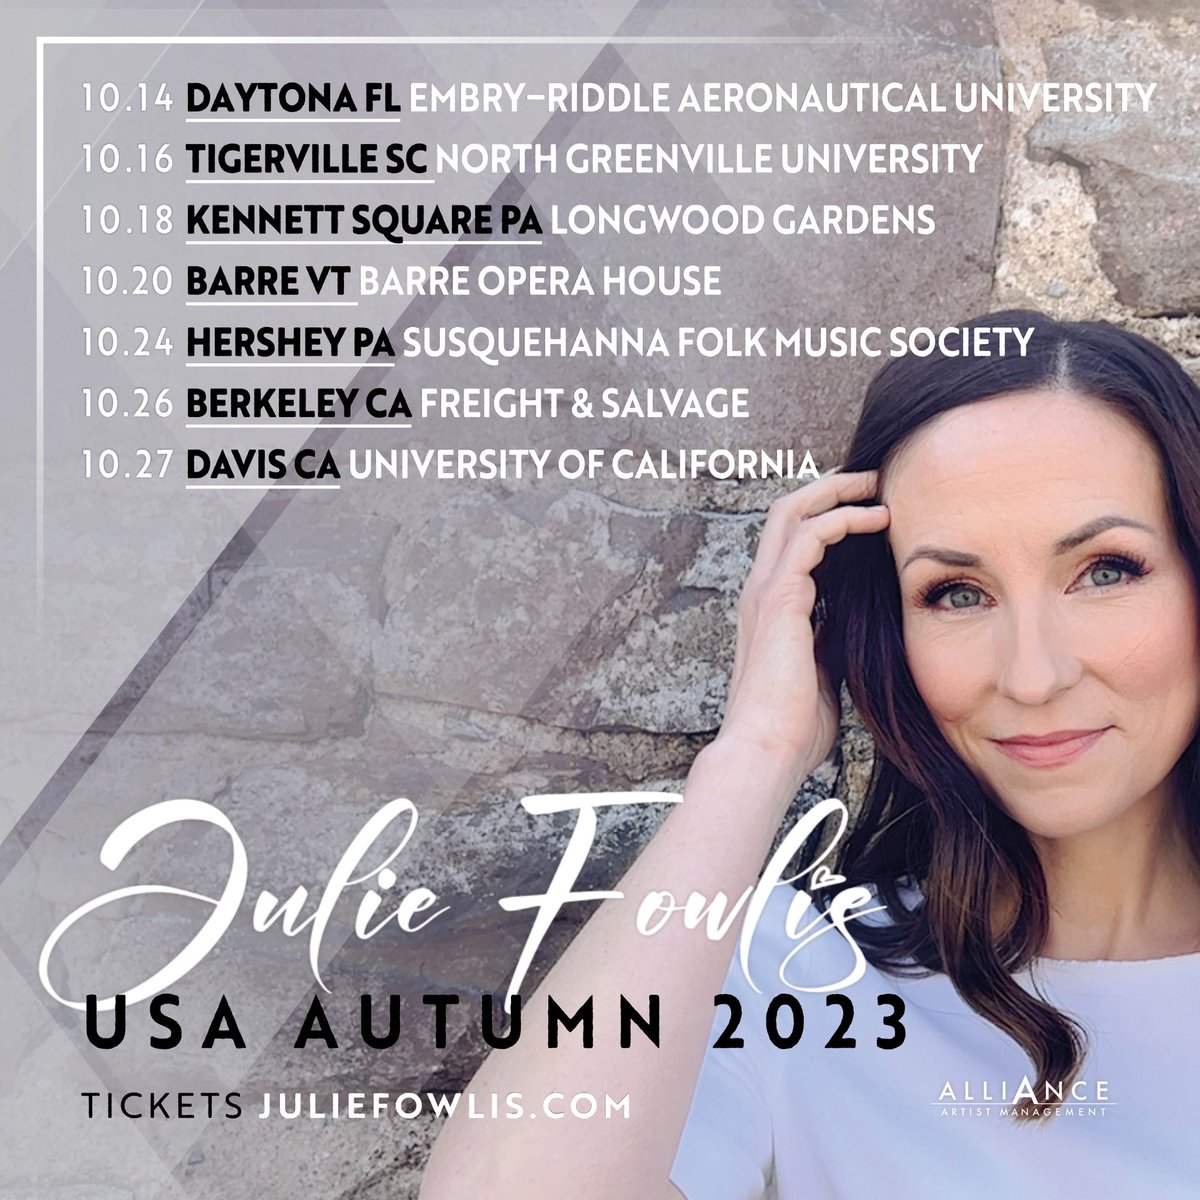 It’s happening! 😍 We head to the US this Fall 🇺🇸 and can’t wait to see you. Please share & RT friends, thank you 🙏 #OnTour #Scotland #Gaelic #livemusic